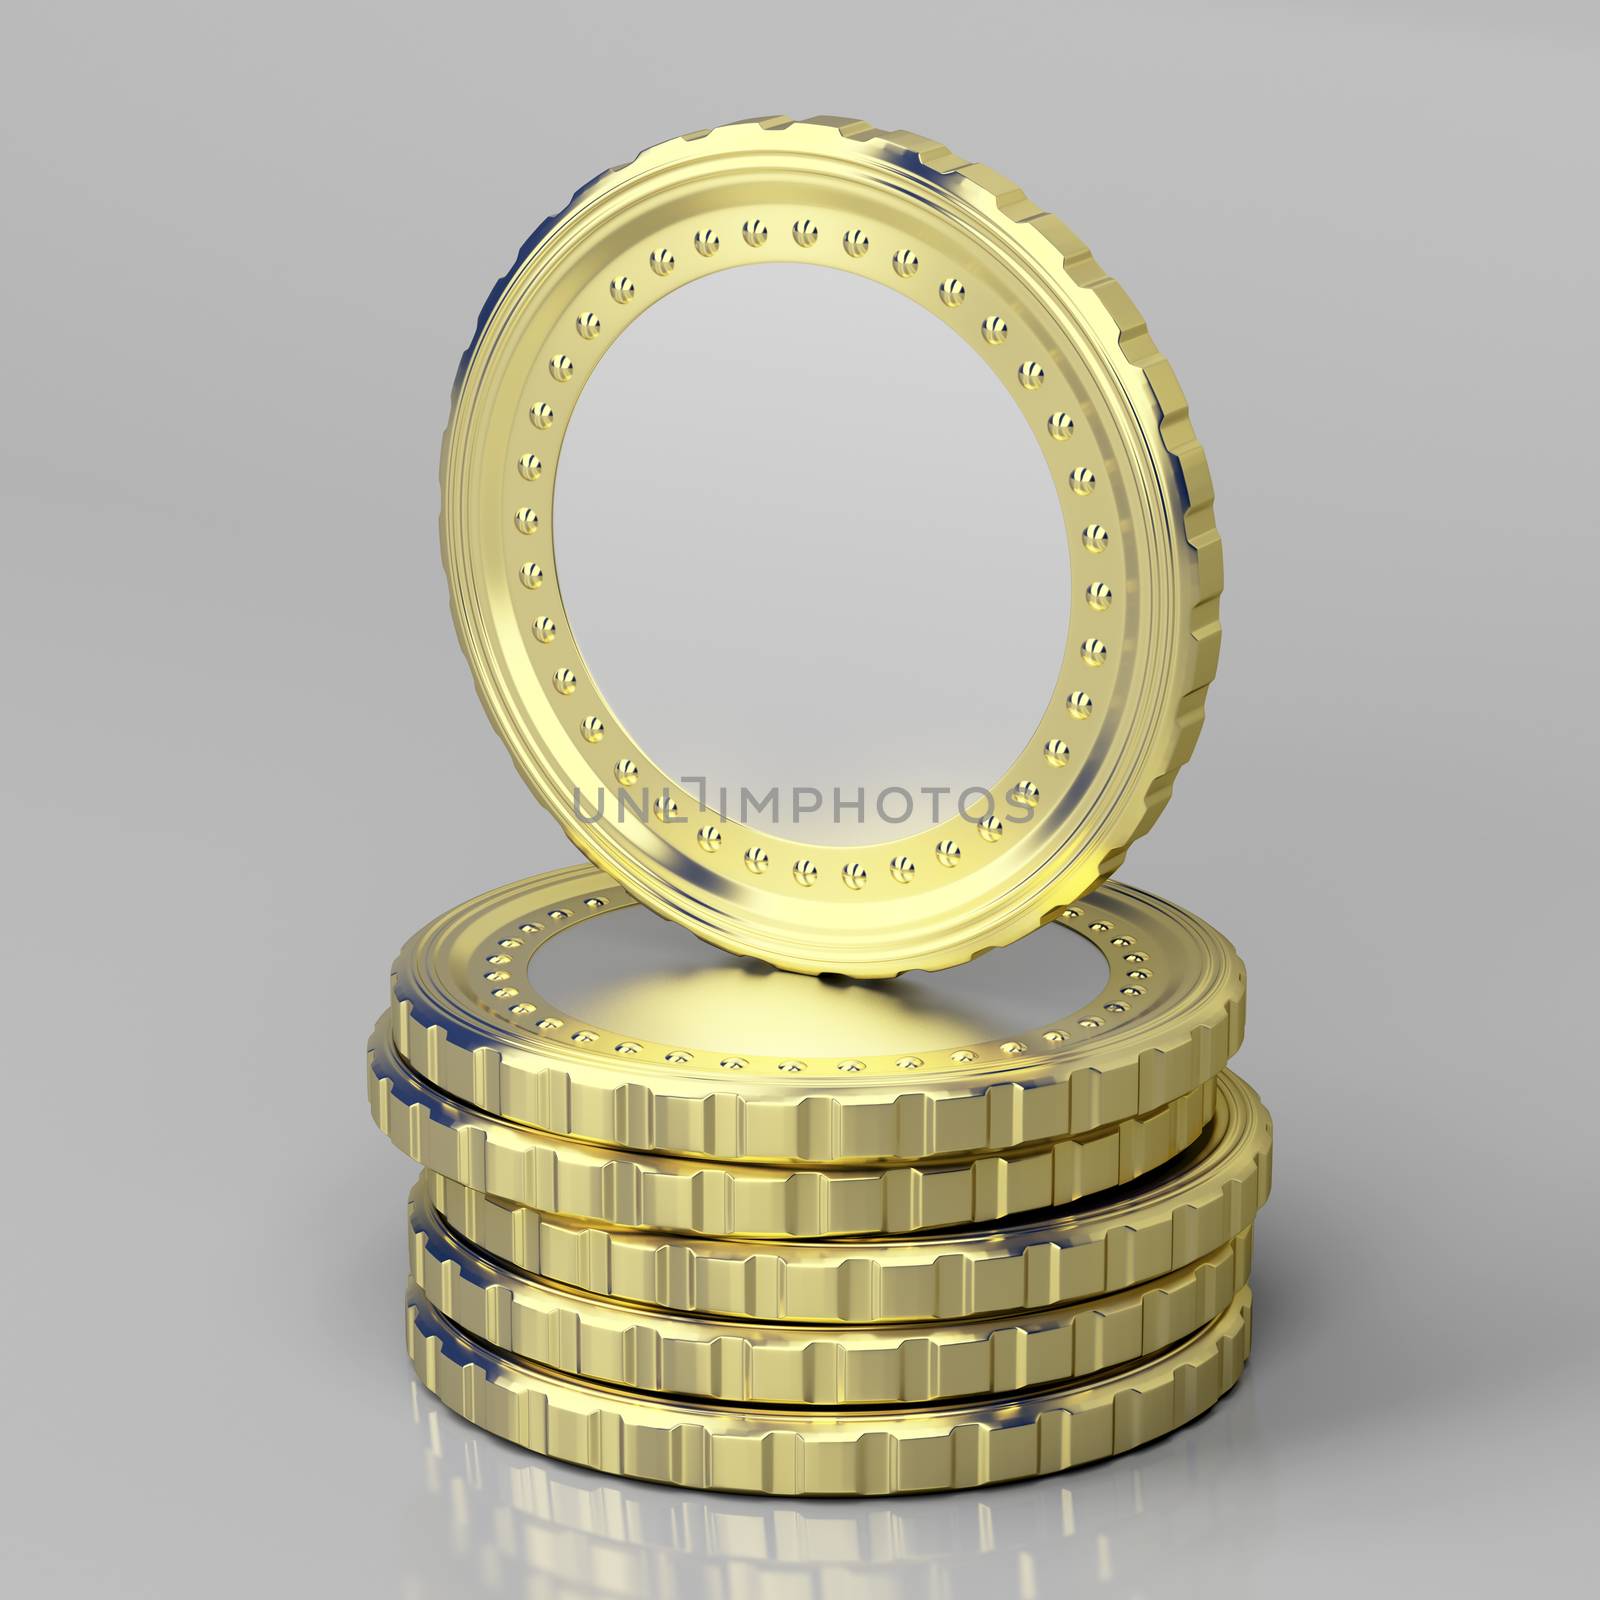 Blank coins by magraphics